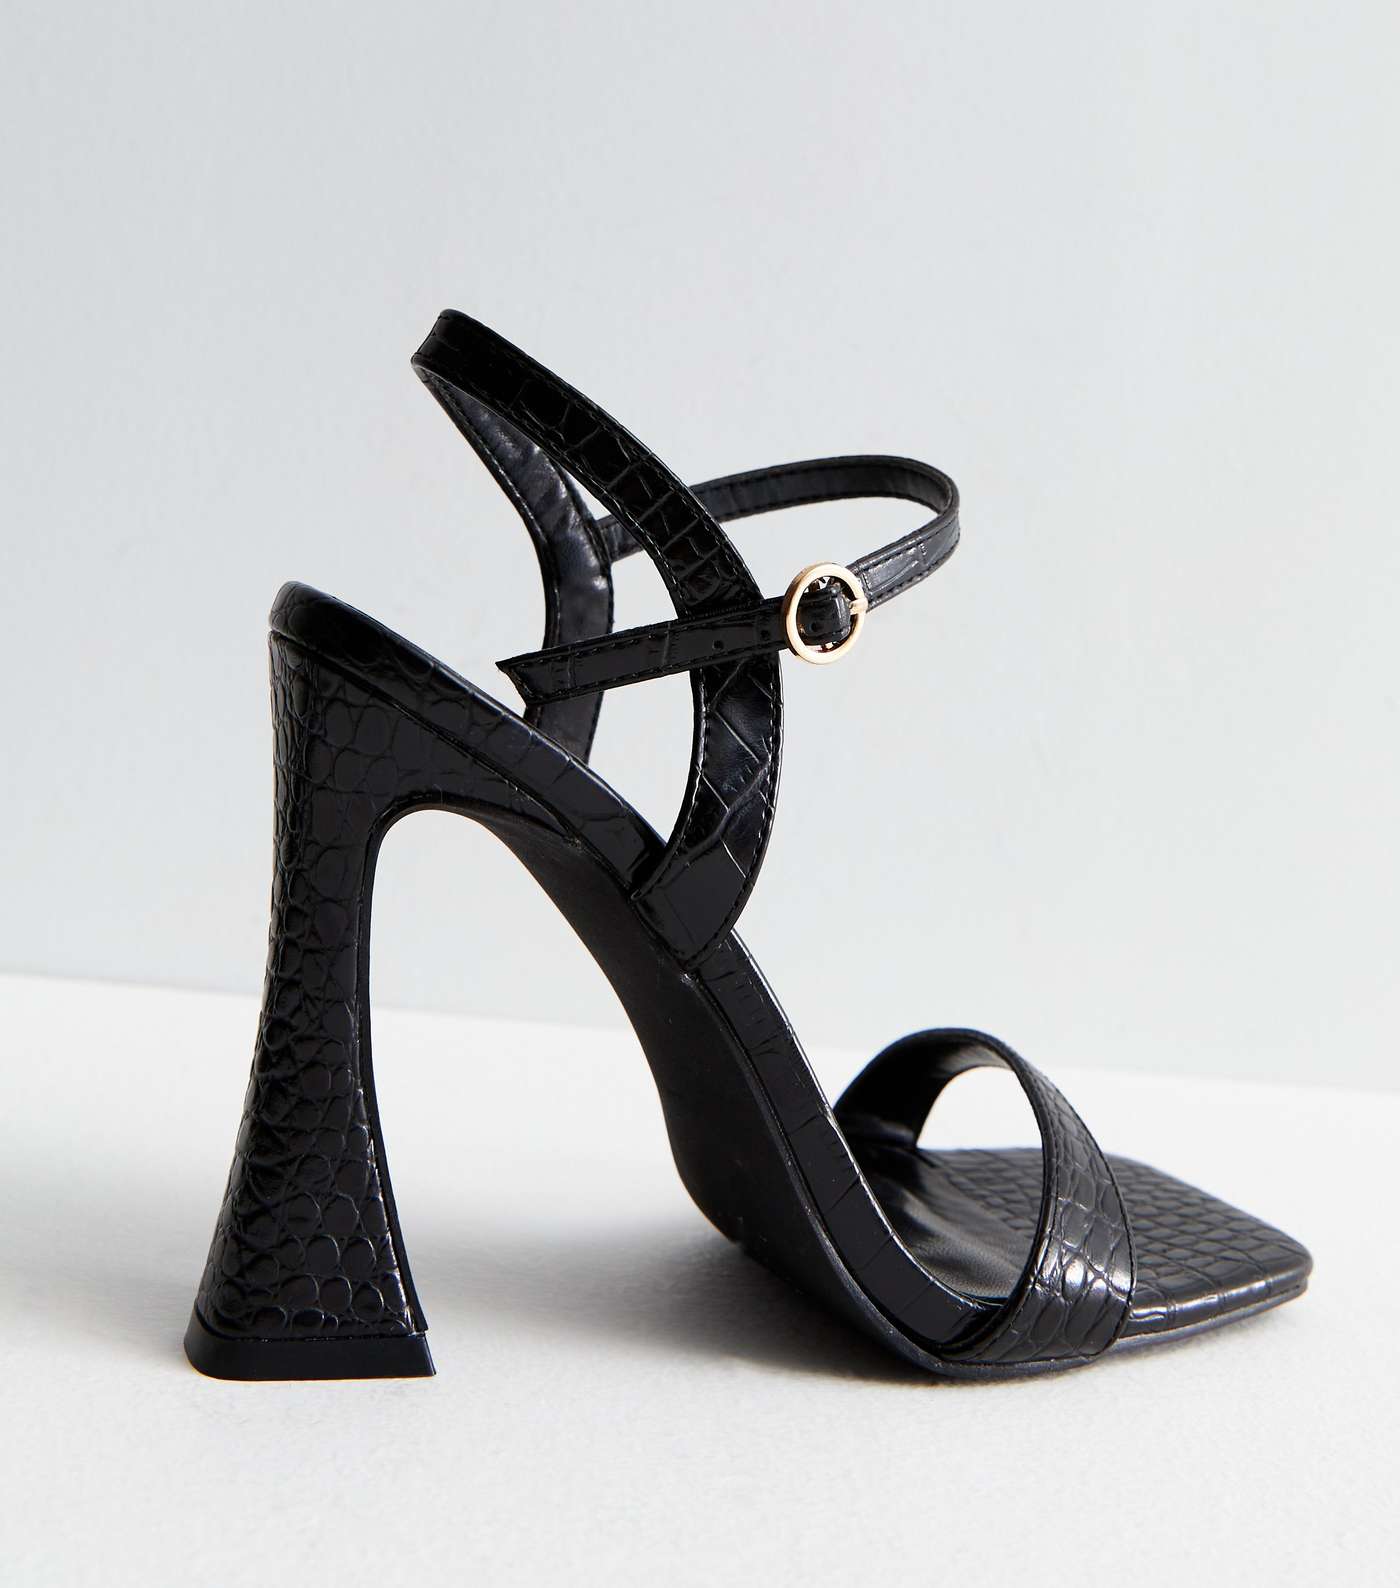 Black Faux Croc Flared Heel Strappy Sandals Image 4